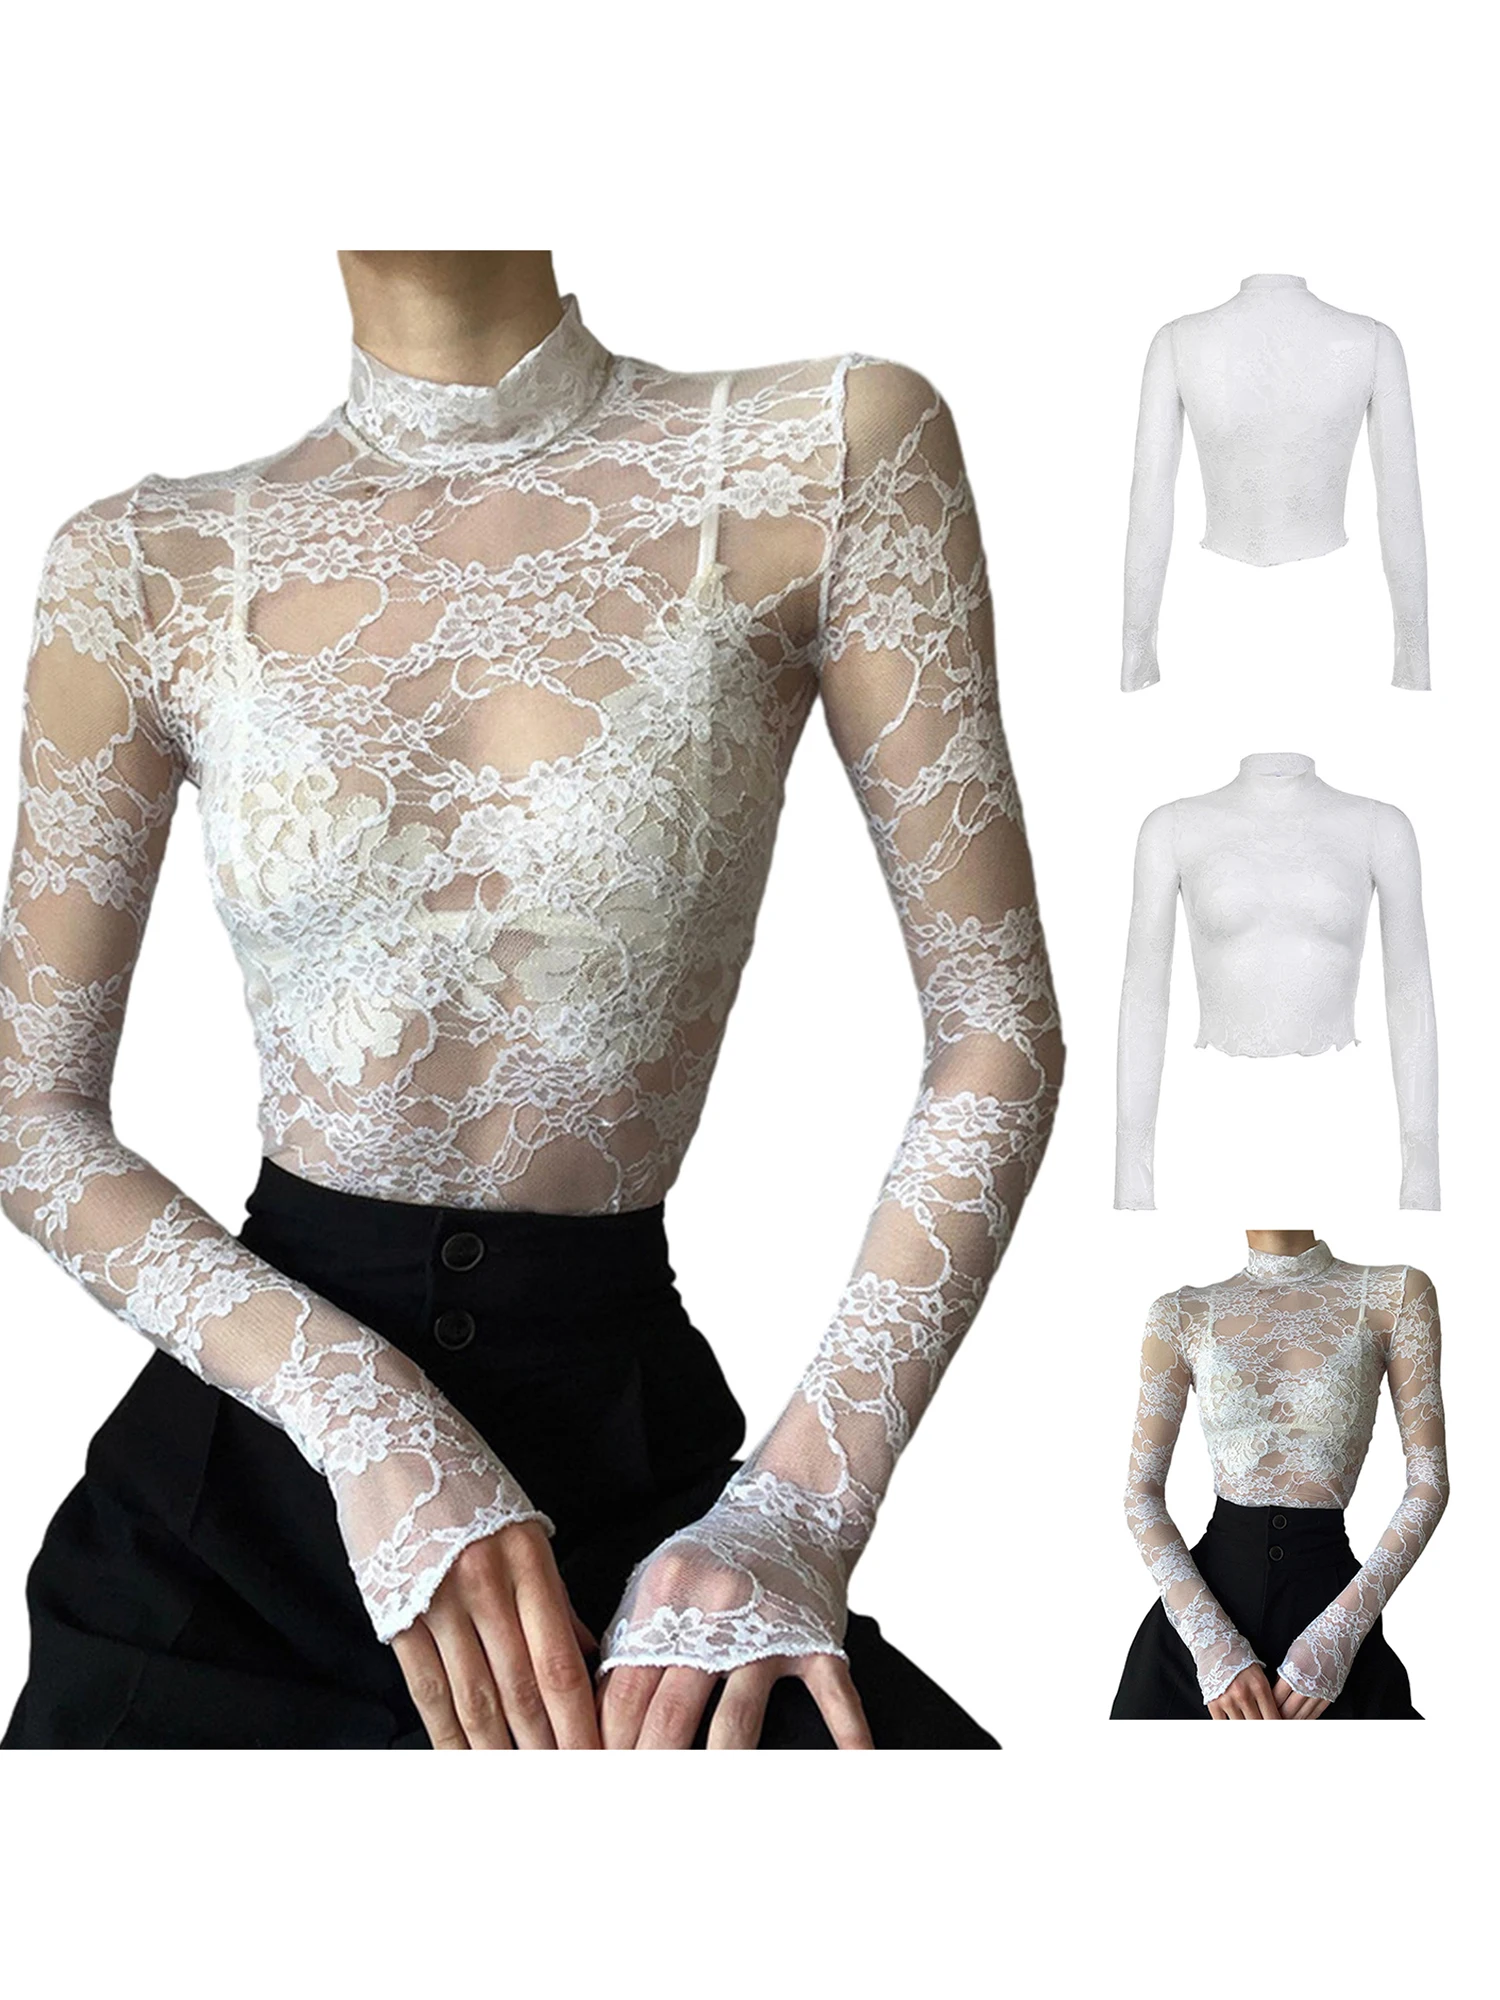 Women Lace Floral Slim T-Shirt White Long Sleeve Mock Neck Crop Tops White See Through Shirt Tops Fairy Grunge 2000s Streetwear